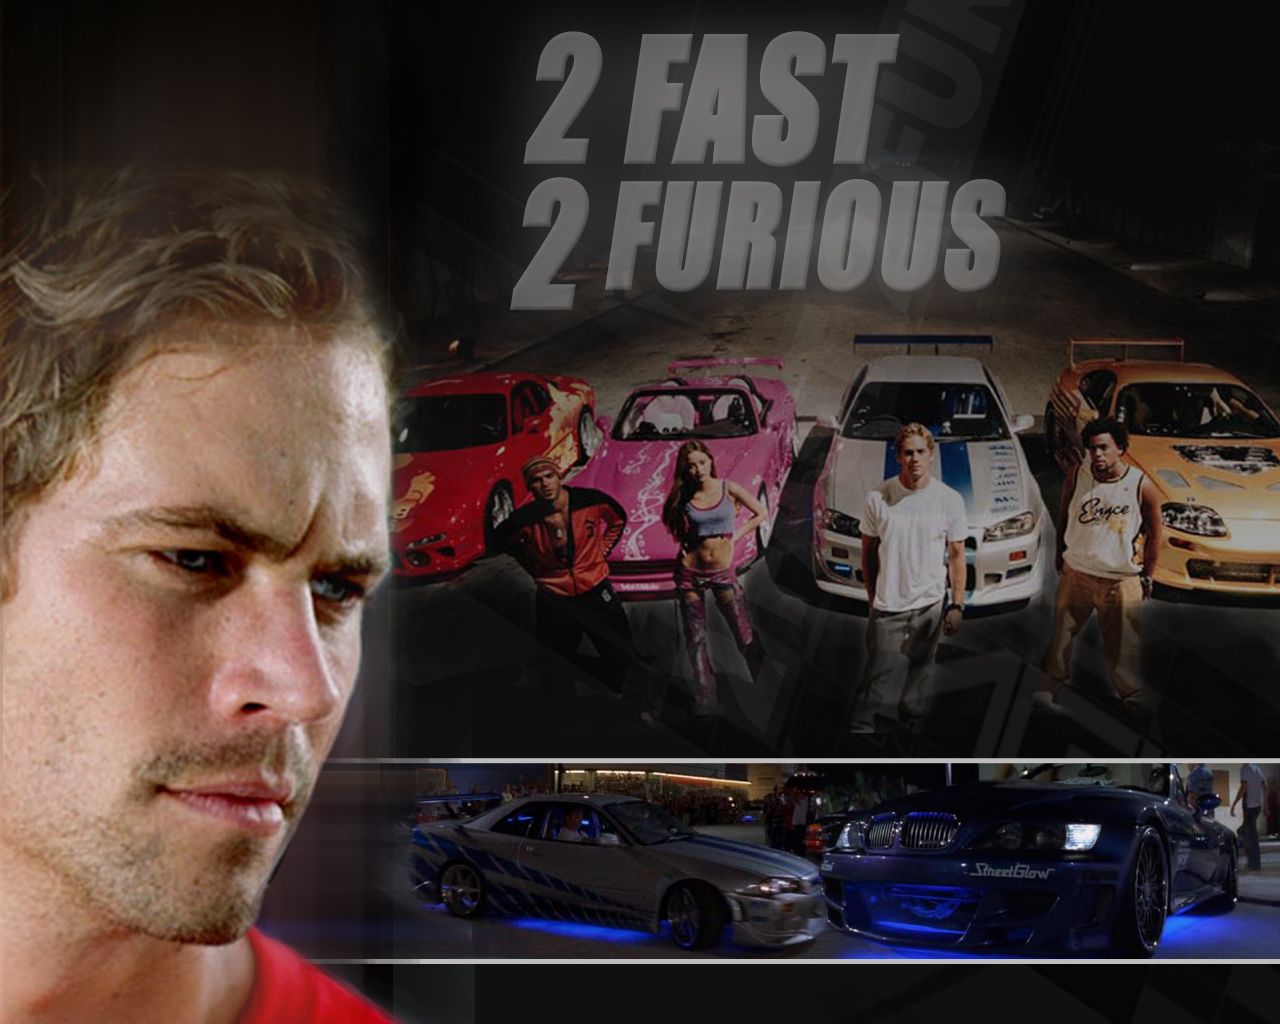 2 fast 2 furious download 1080p torrent